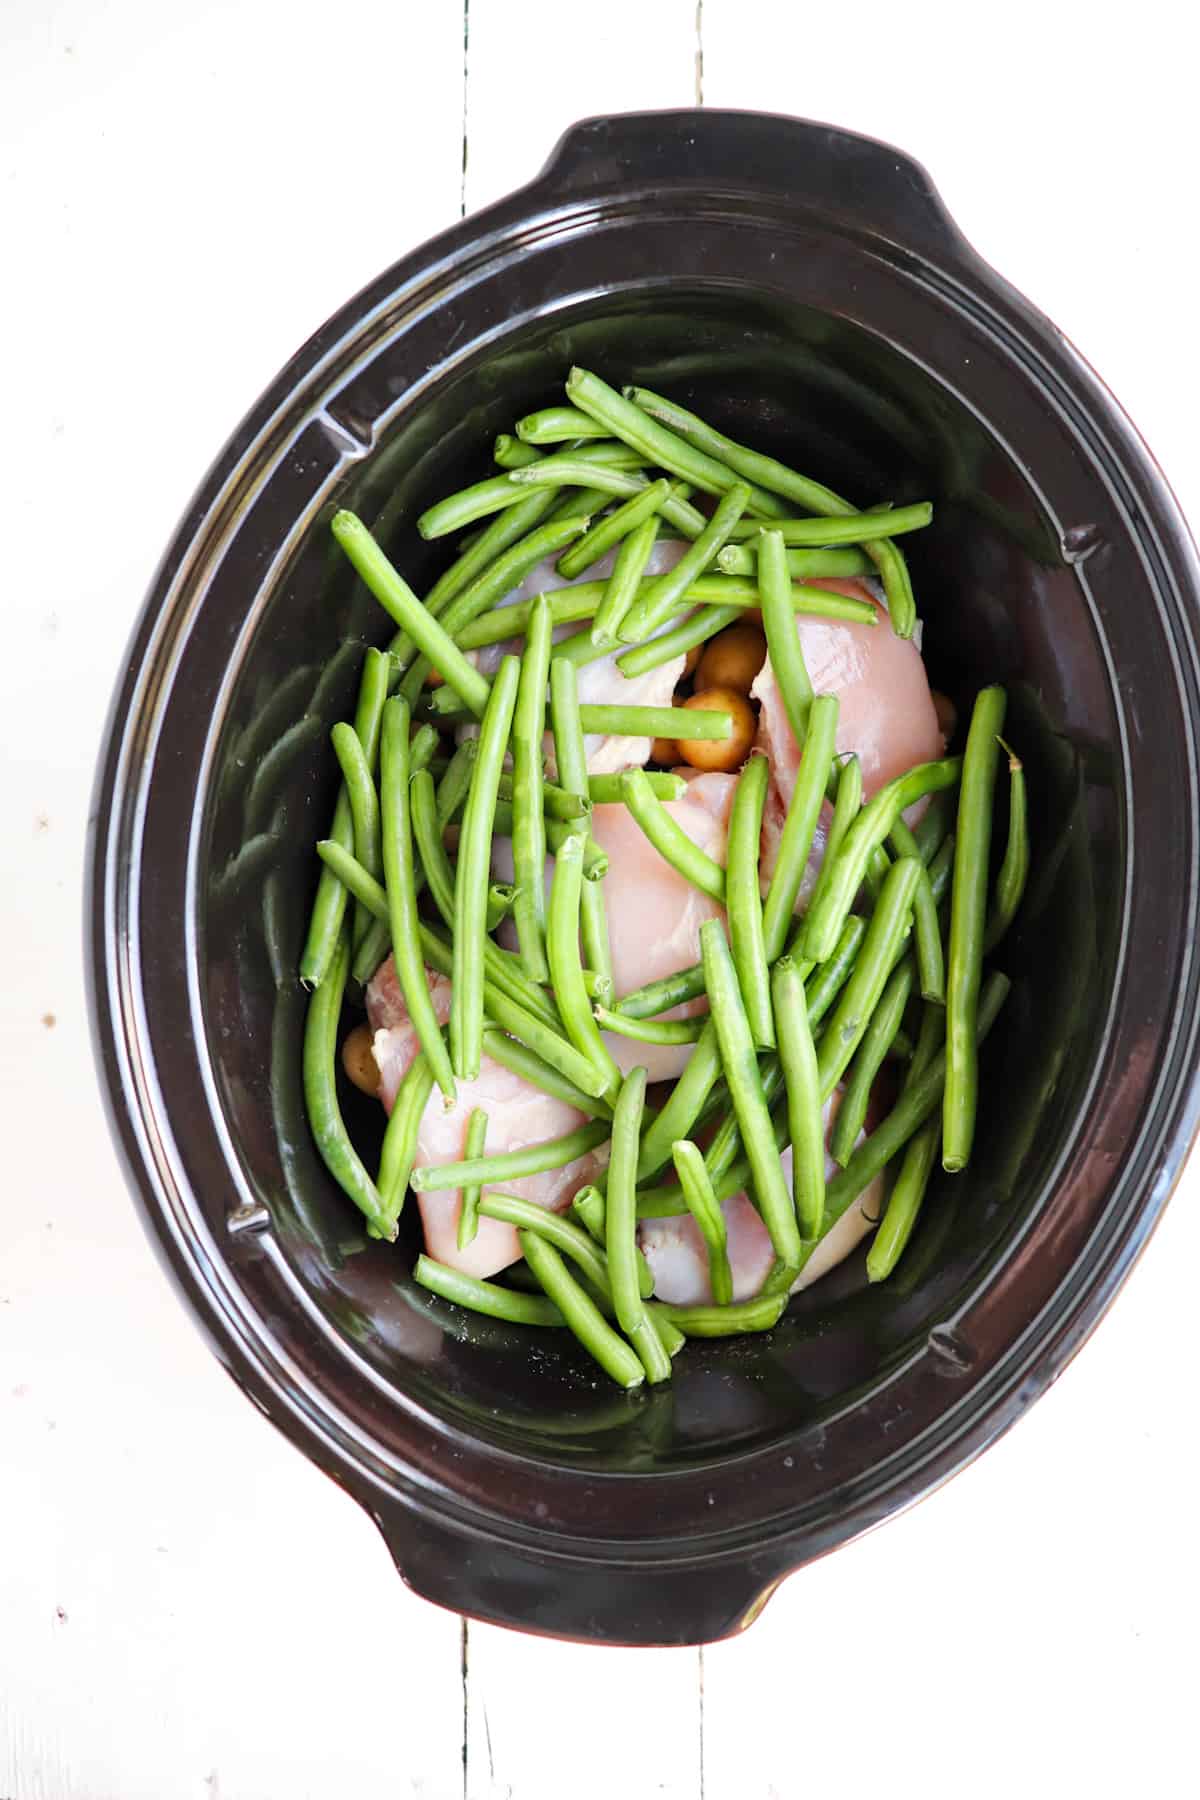 fresh green beans added on top of other ingredients in the crock pot.